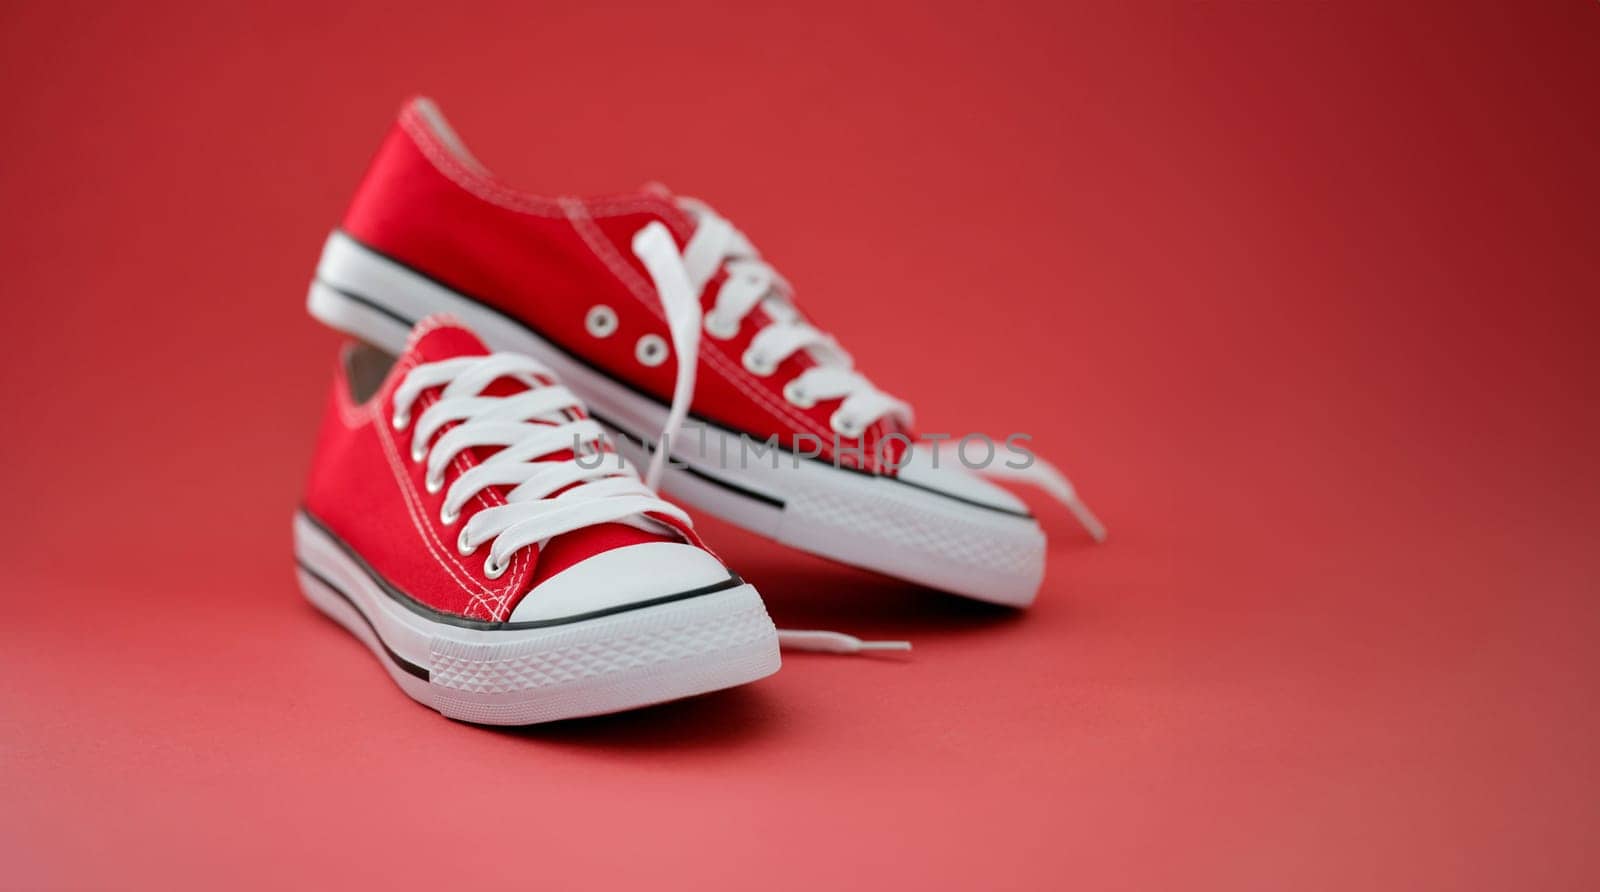 Fashionable red sports sneakers with white laces. Sports shoes concept